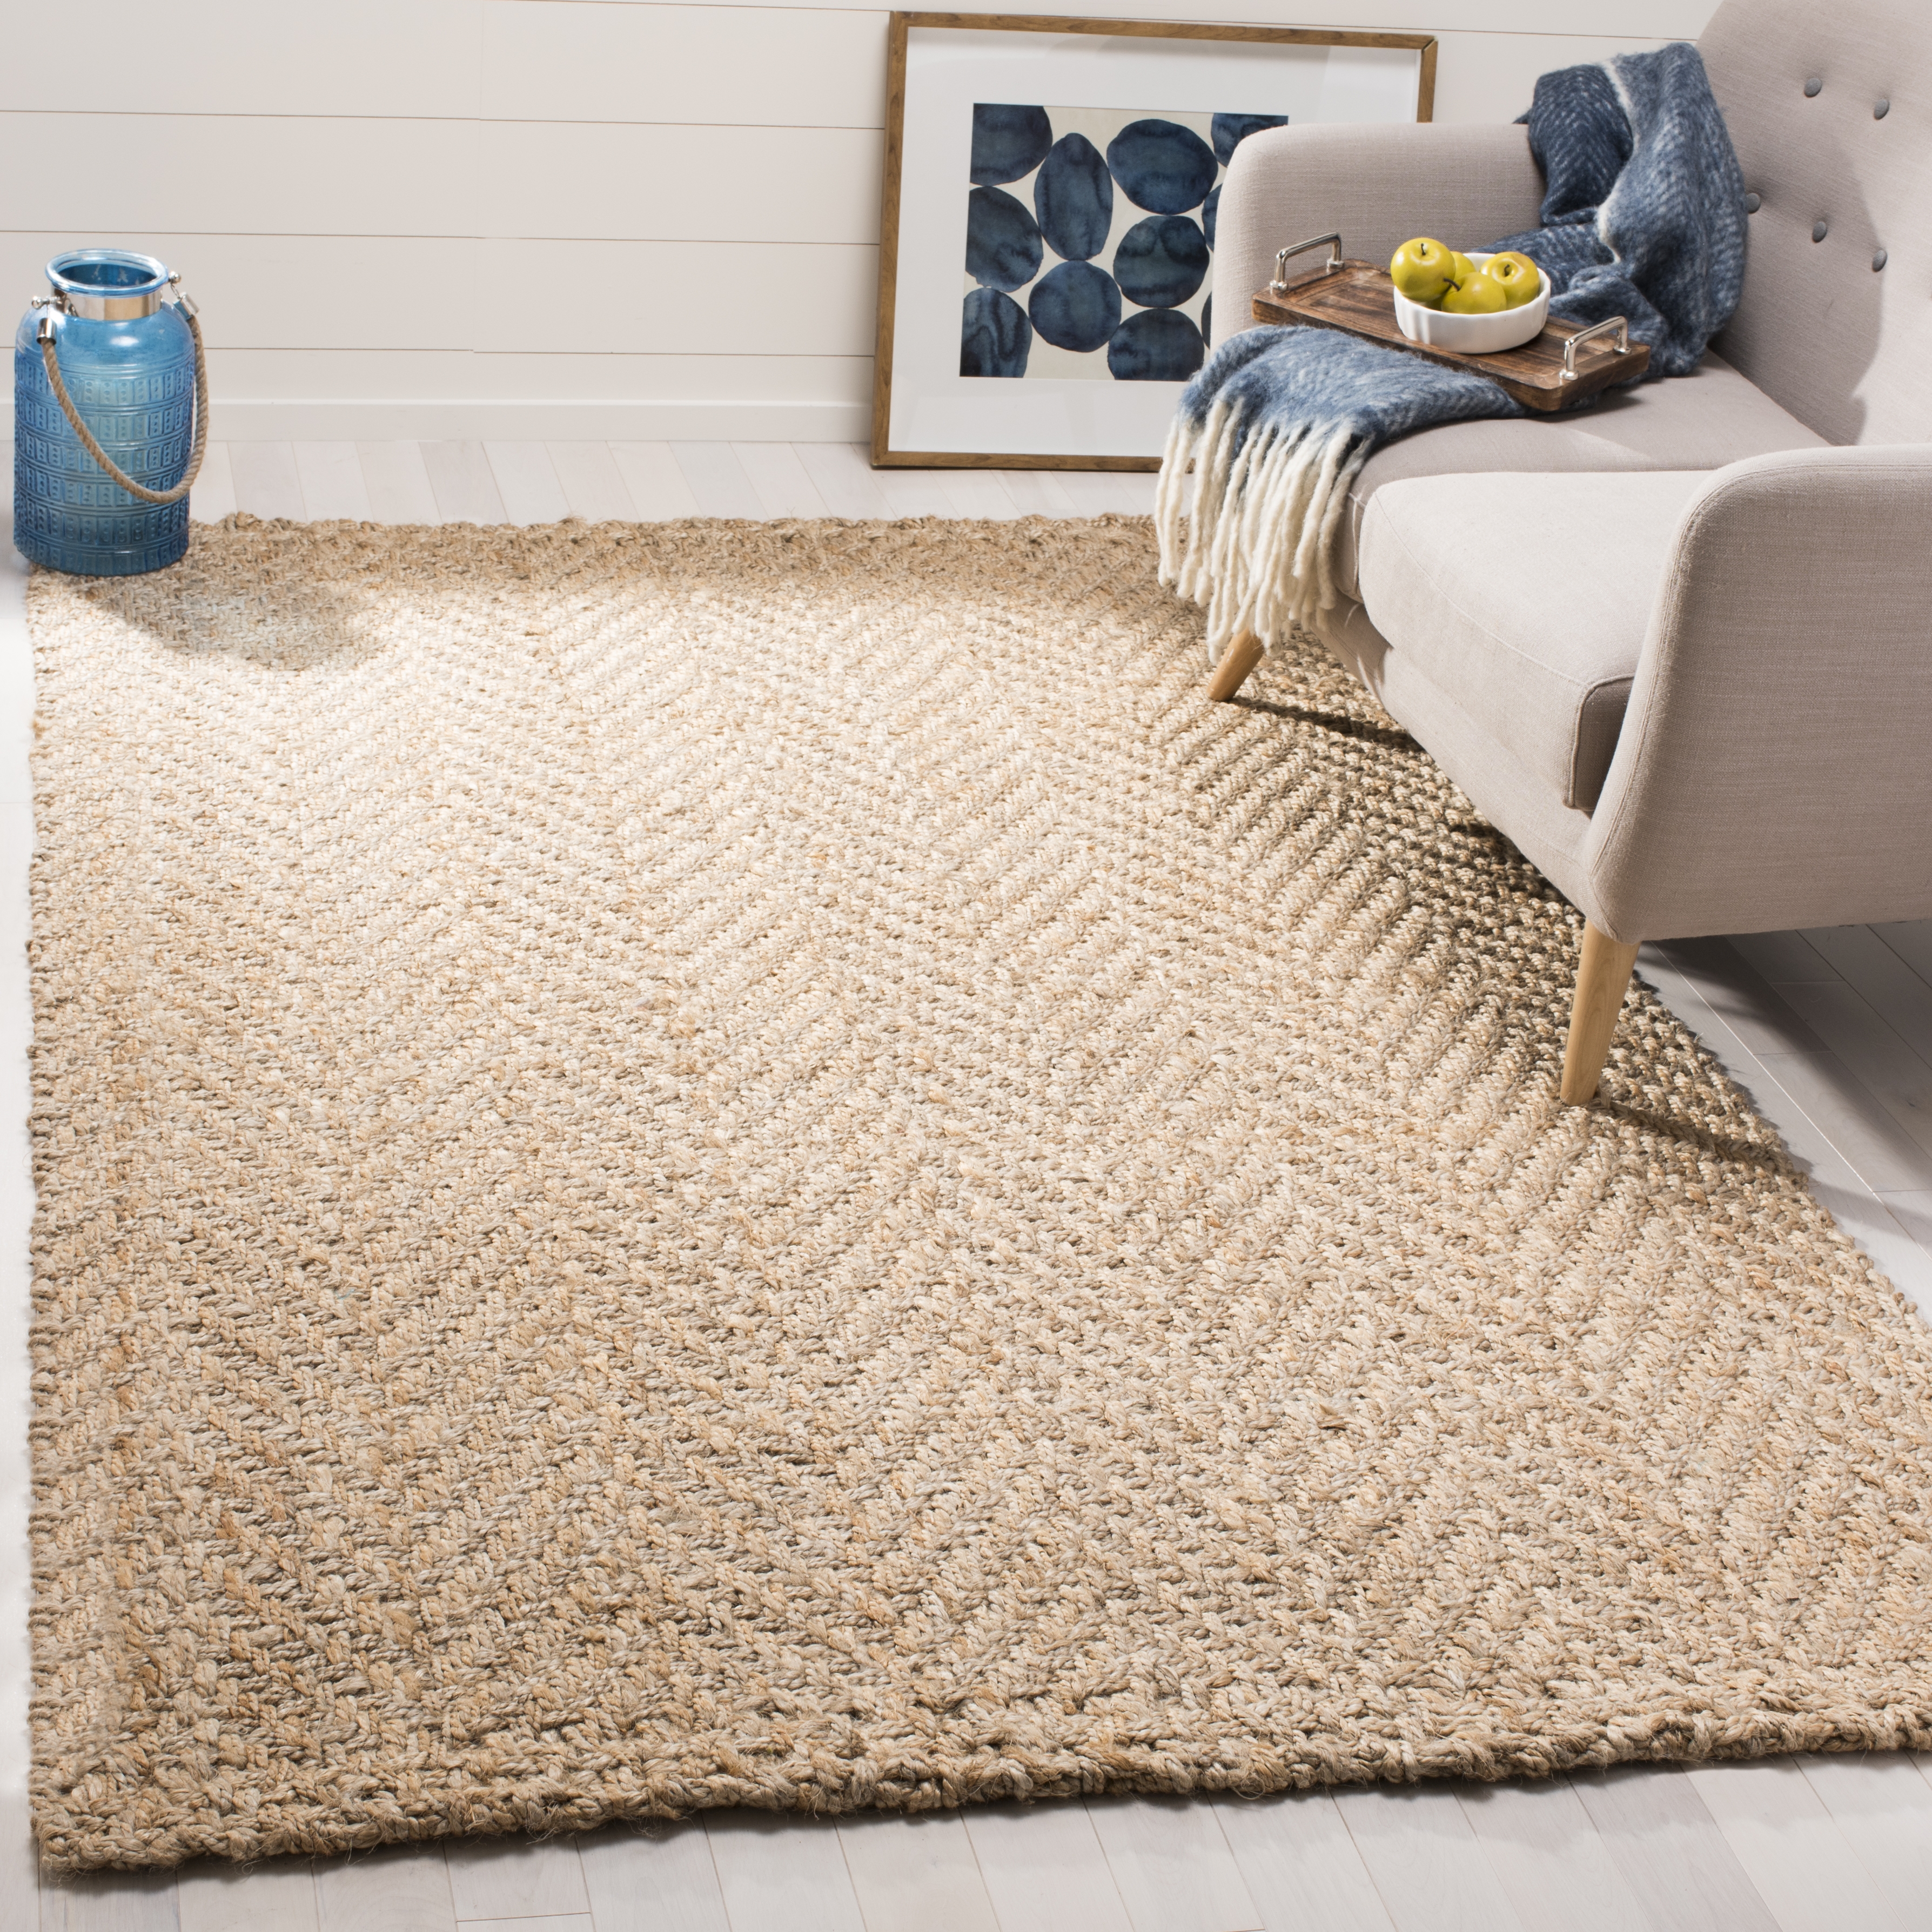 Arlo Home Hand Woven Area Rug, NF265A, Natural,  3' X 5' - Image 1